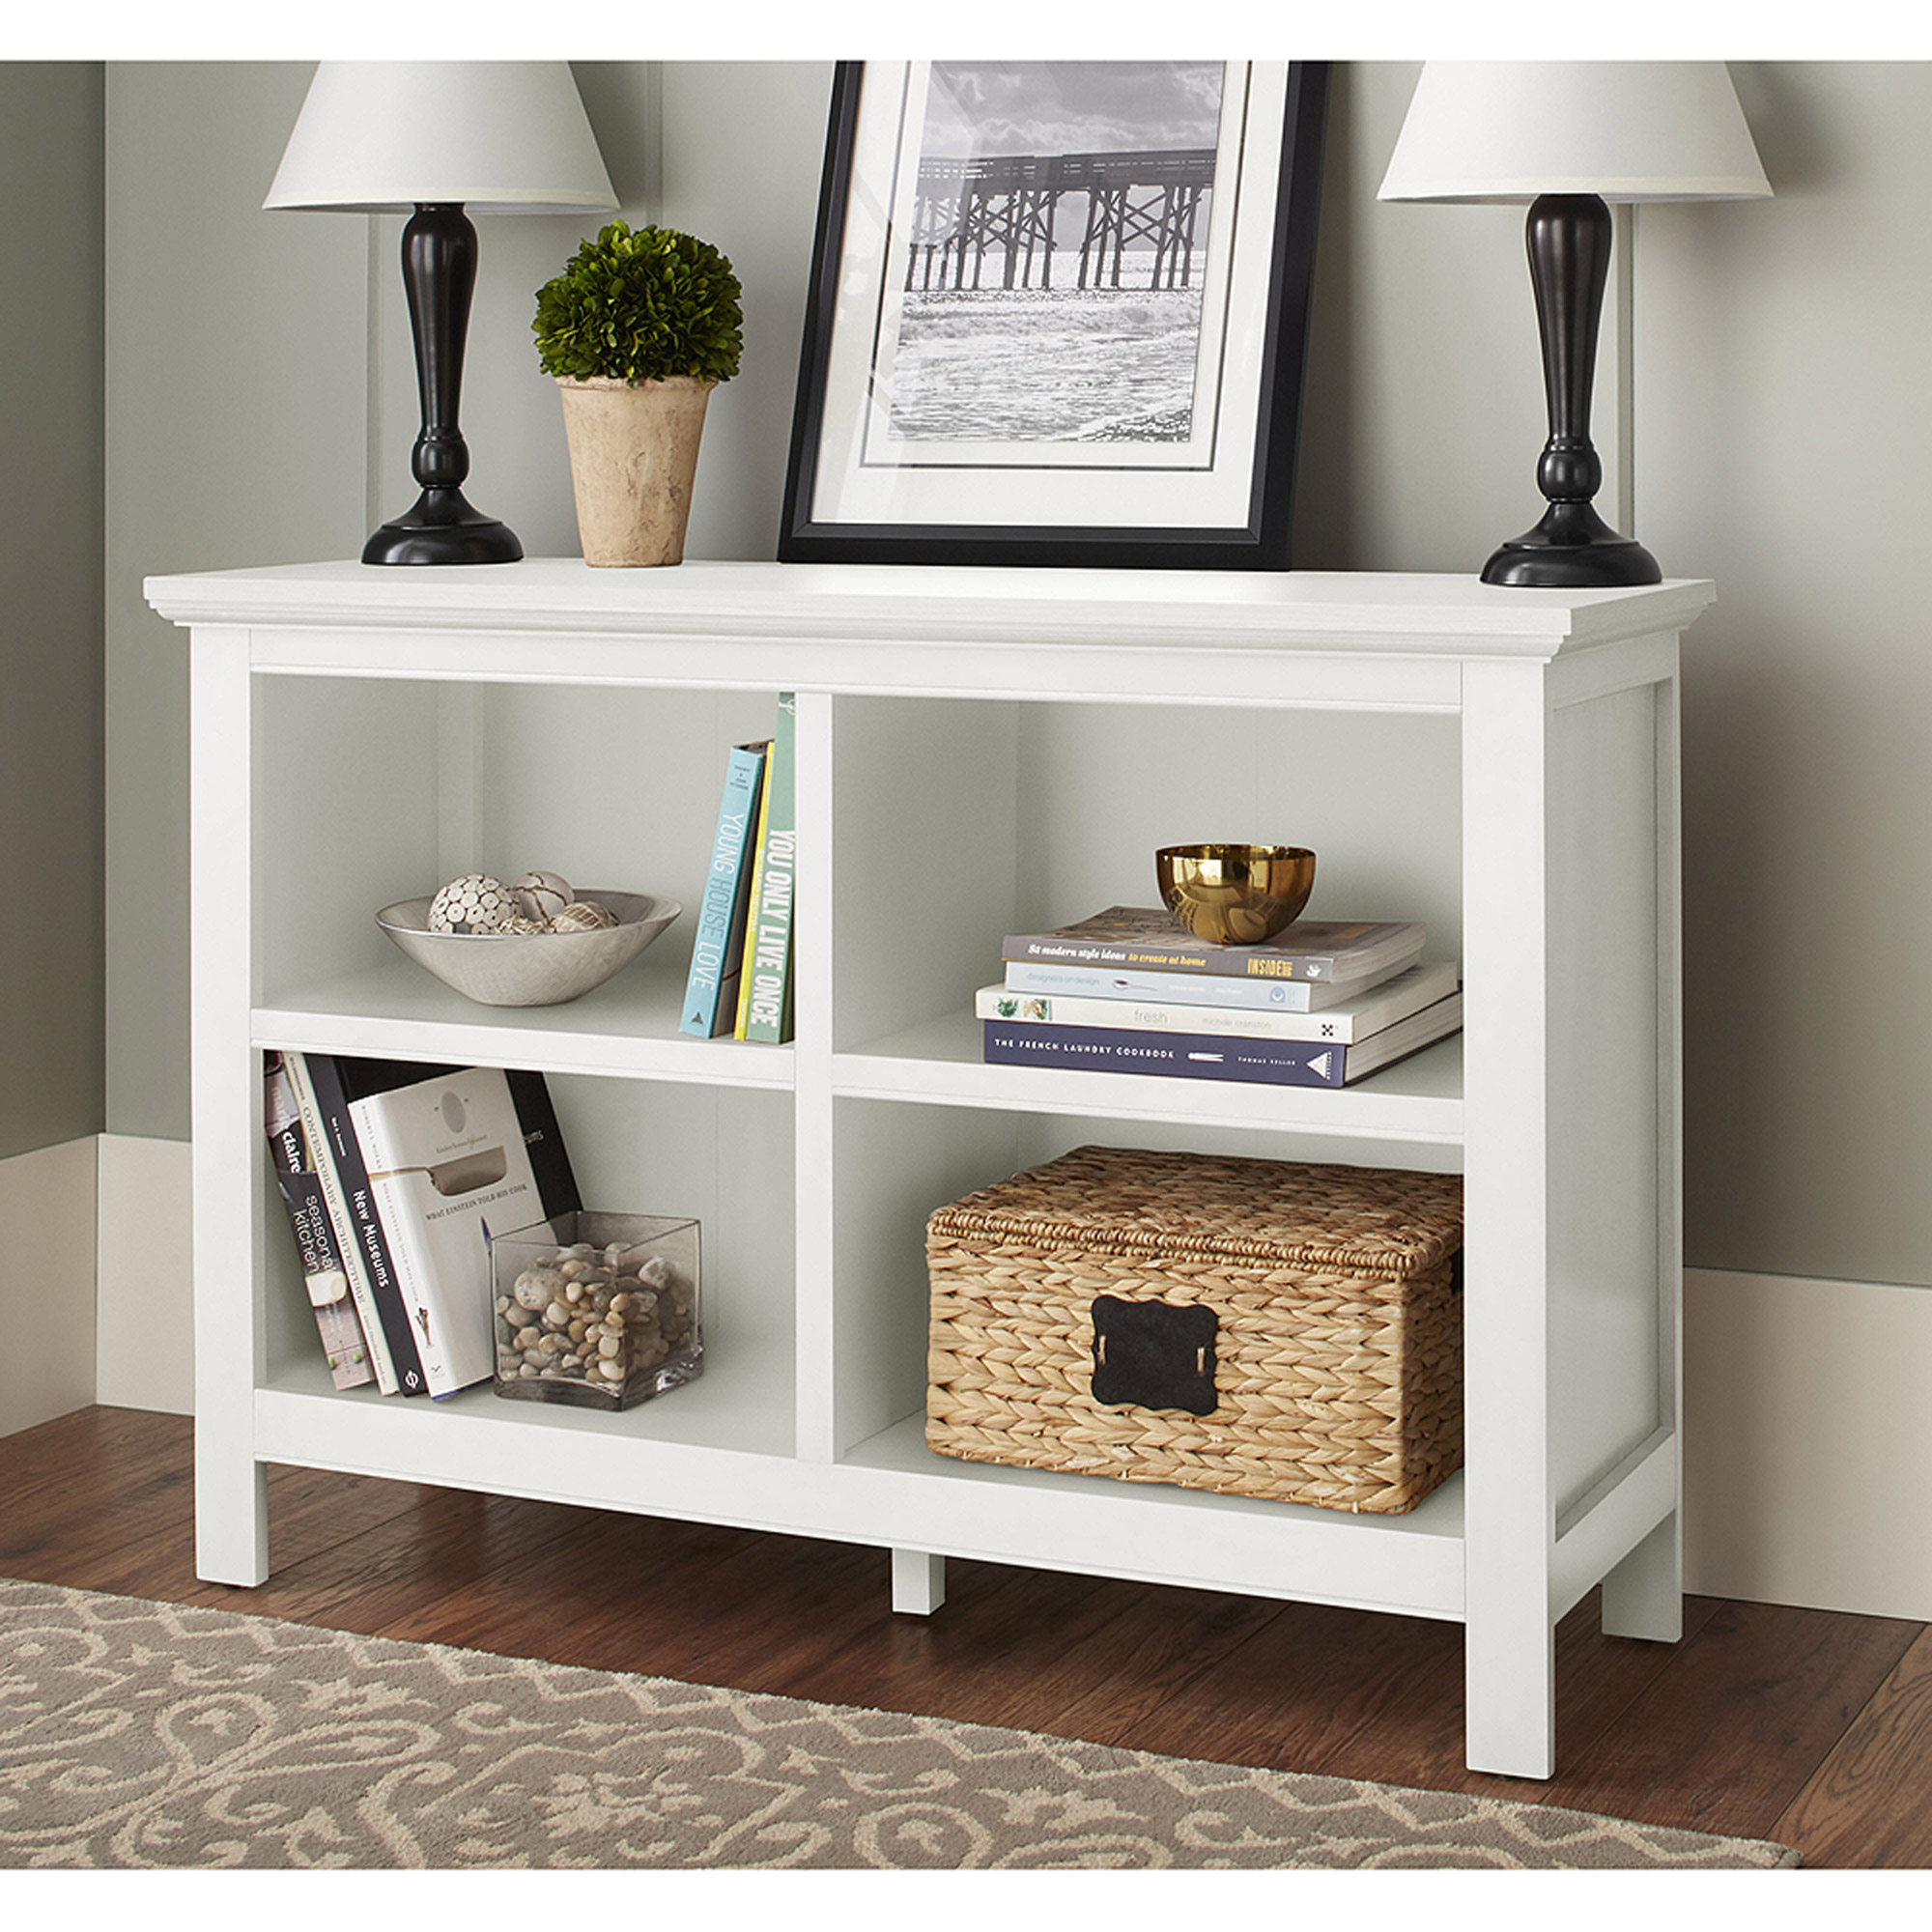 What are the advantages for getting horizontal bookcase